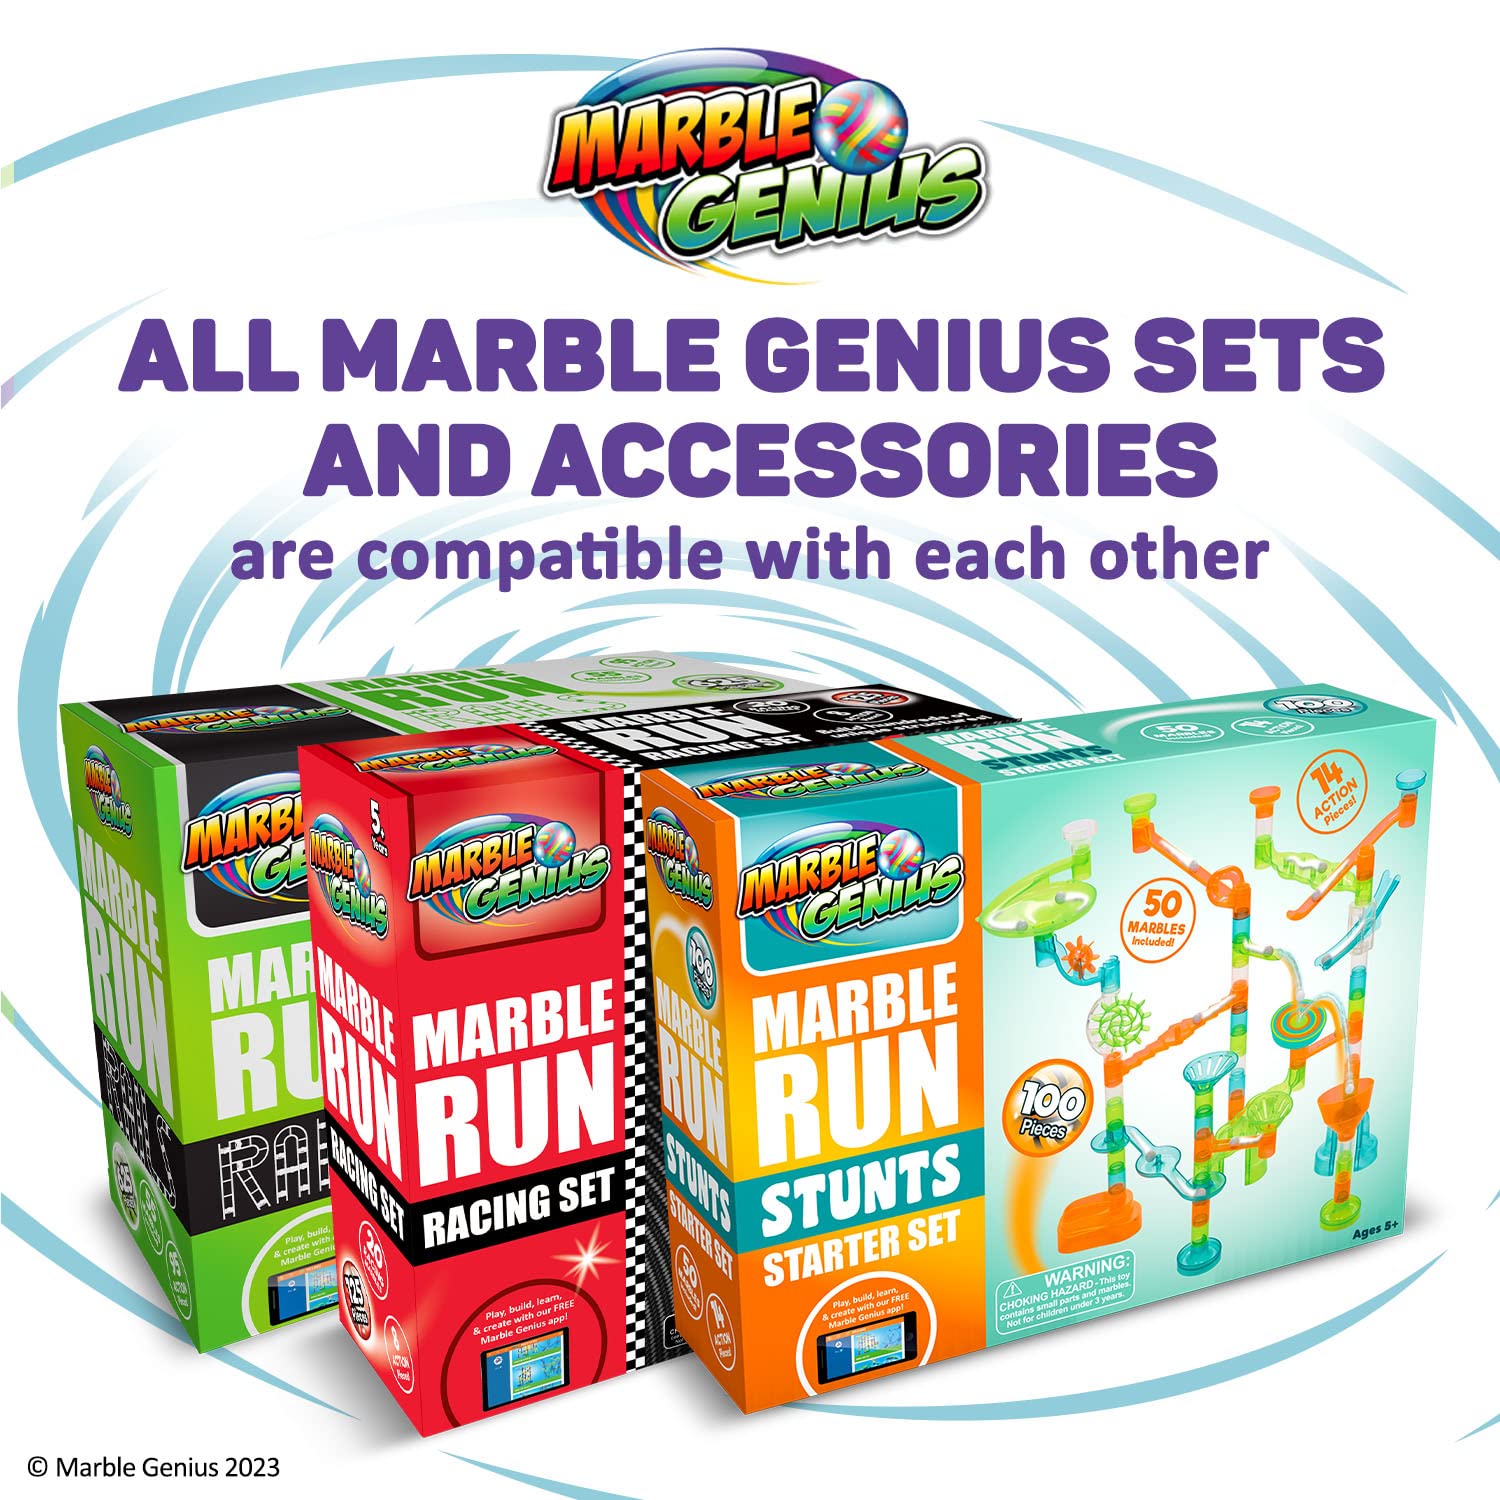 Marble Genius Physics Fun Marble Run Accessory Add-On Set (5 Pieces) - Get Ready to Engage in Endless Hours of Fun and Learning - Watch Your Marbles Race Through This Unique and Innovative Add-On